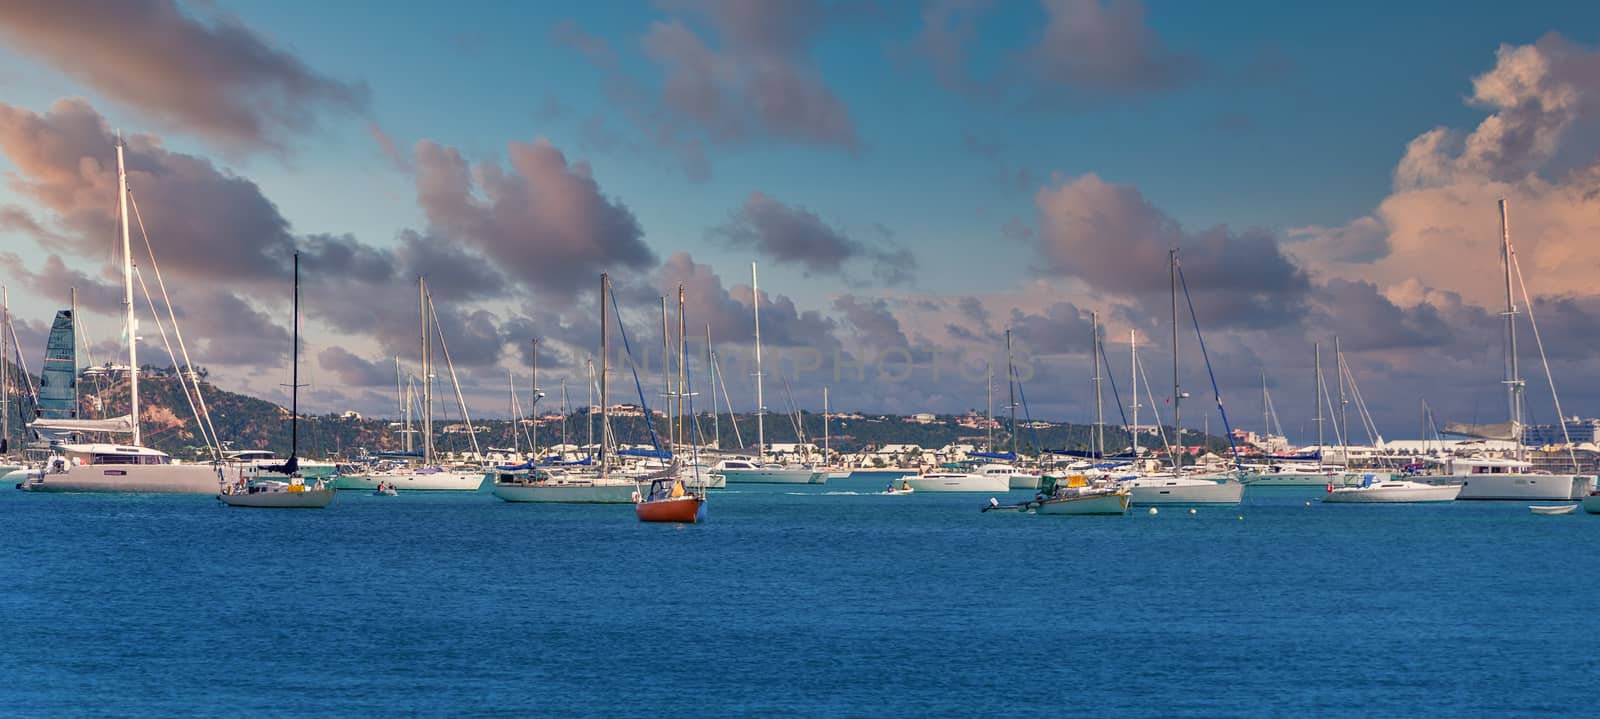 Yachts and Sailboats in Marina in Marigot, the French Side of Saint Marting